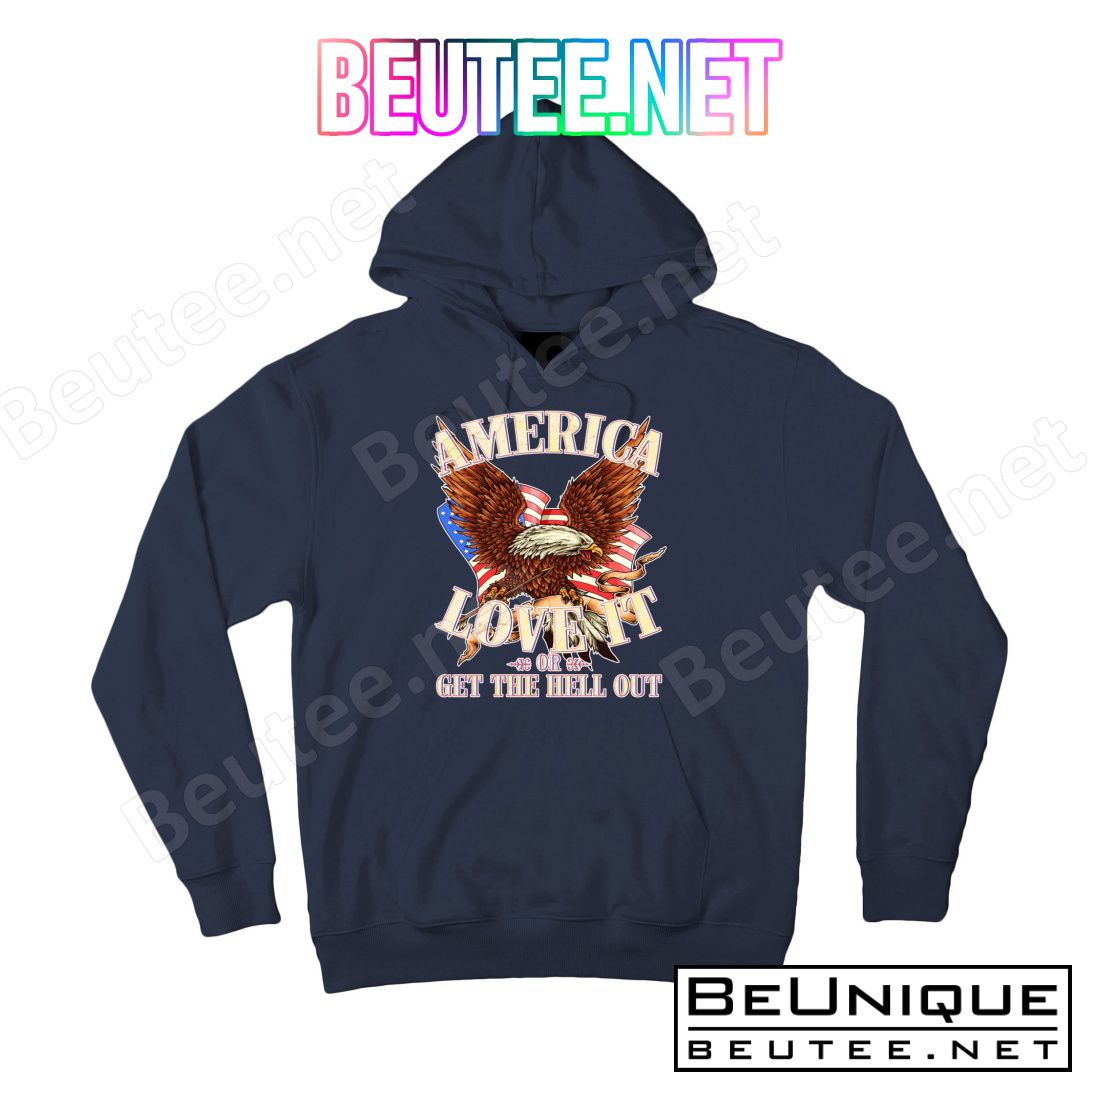 America Love It Or Get the Hell Out T-Shirts